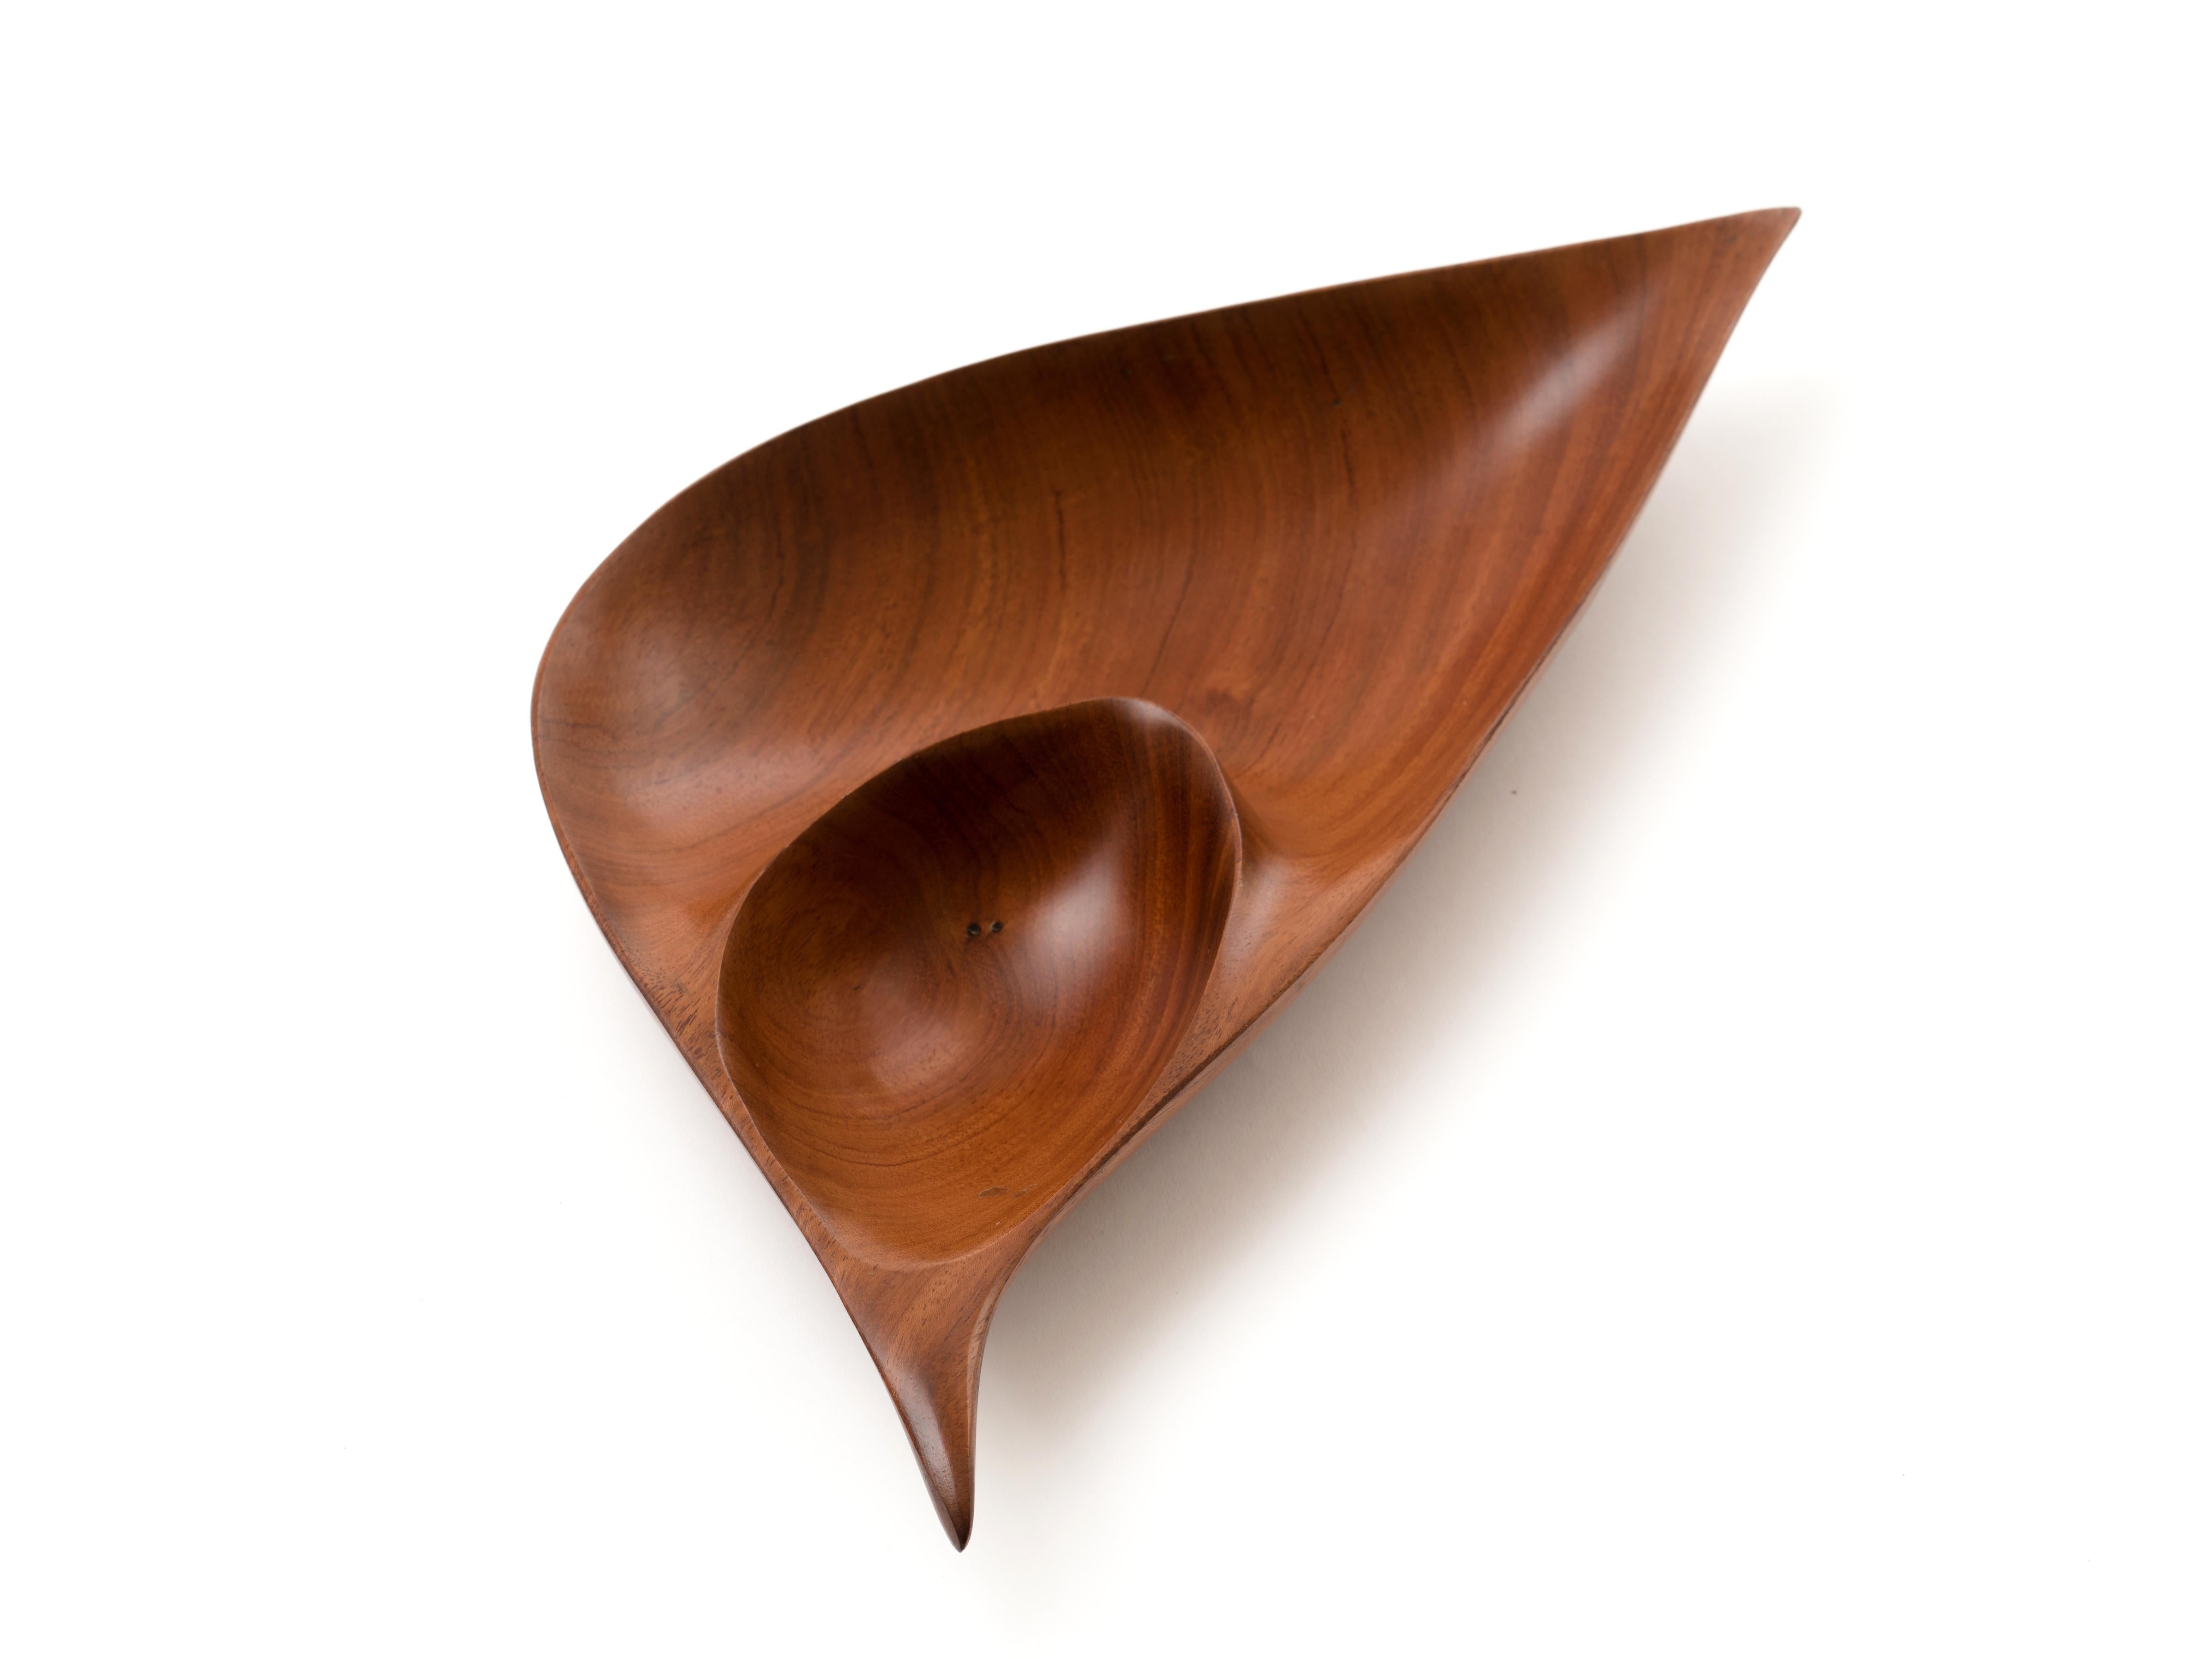 An exquisitely carved double-compartment freeform bowl by Emil Milan (1922-85), executed in bubinga. Rich patina throughout. Signed to the underside, 